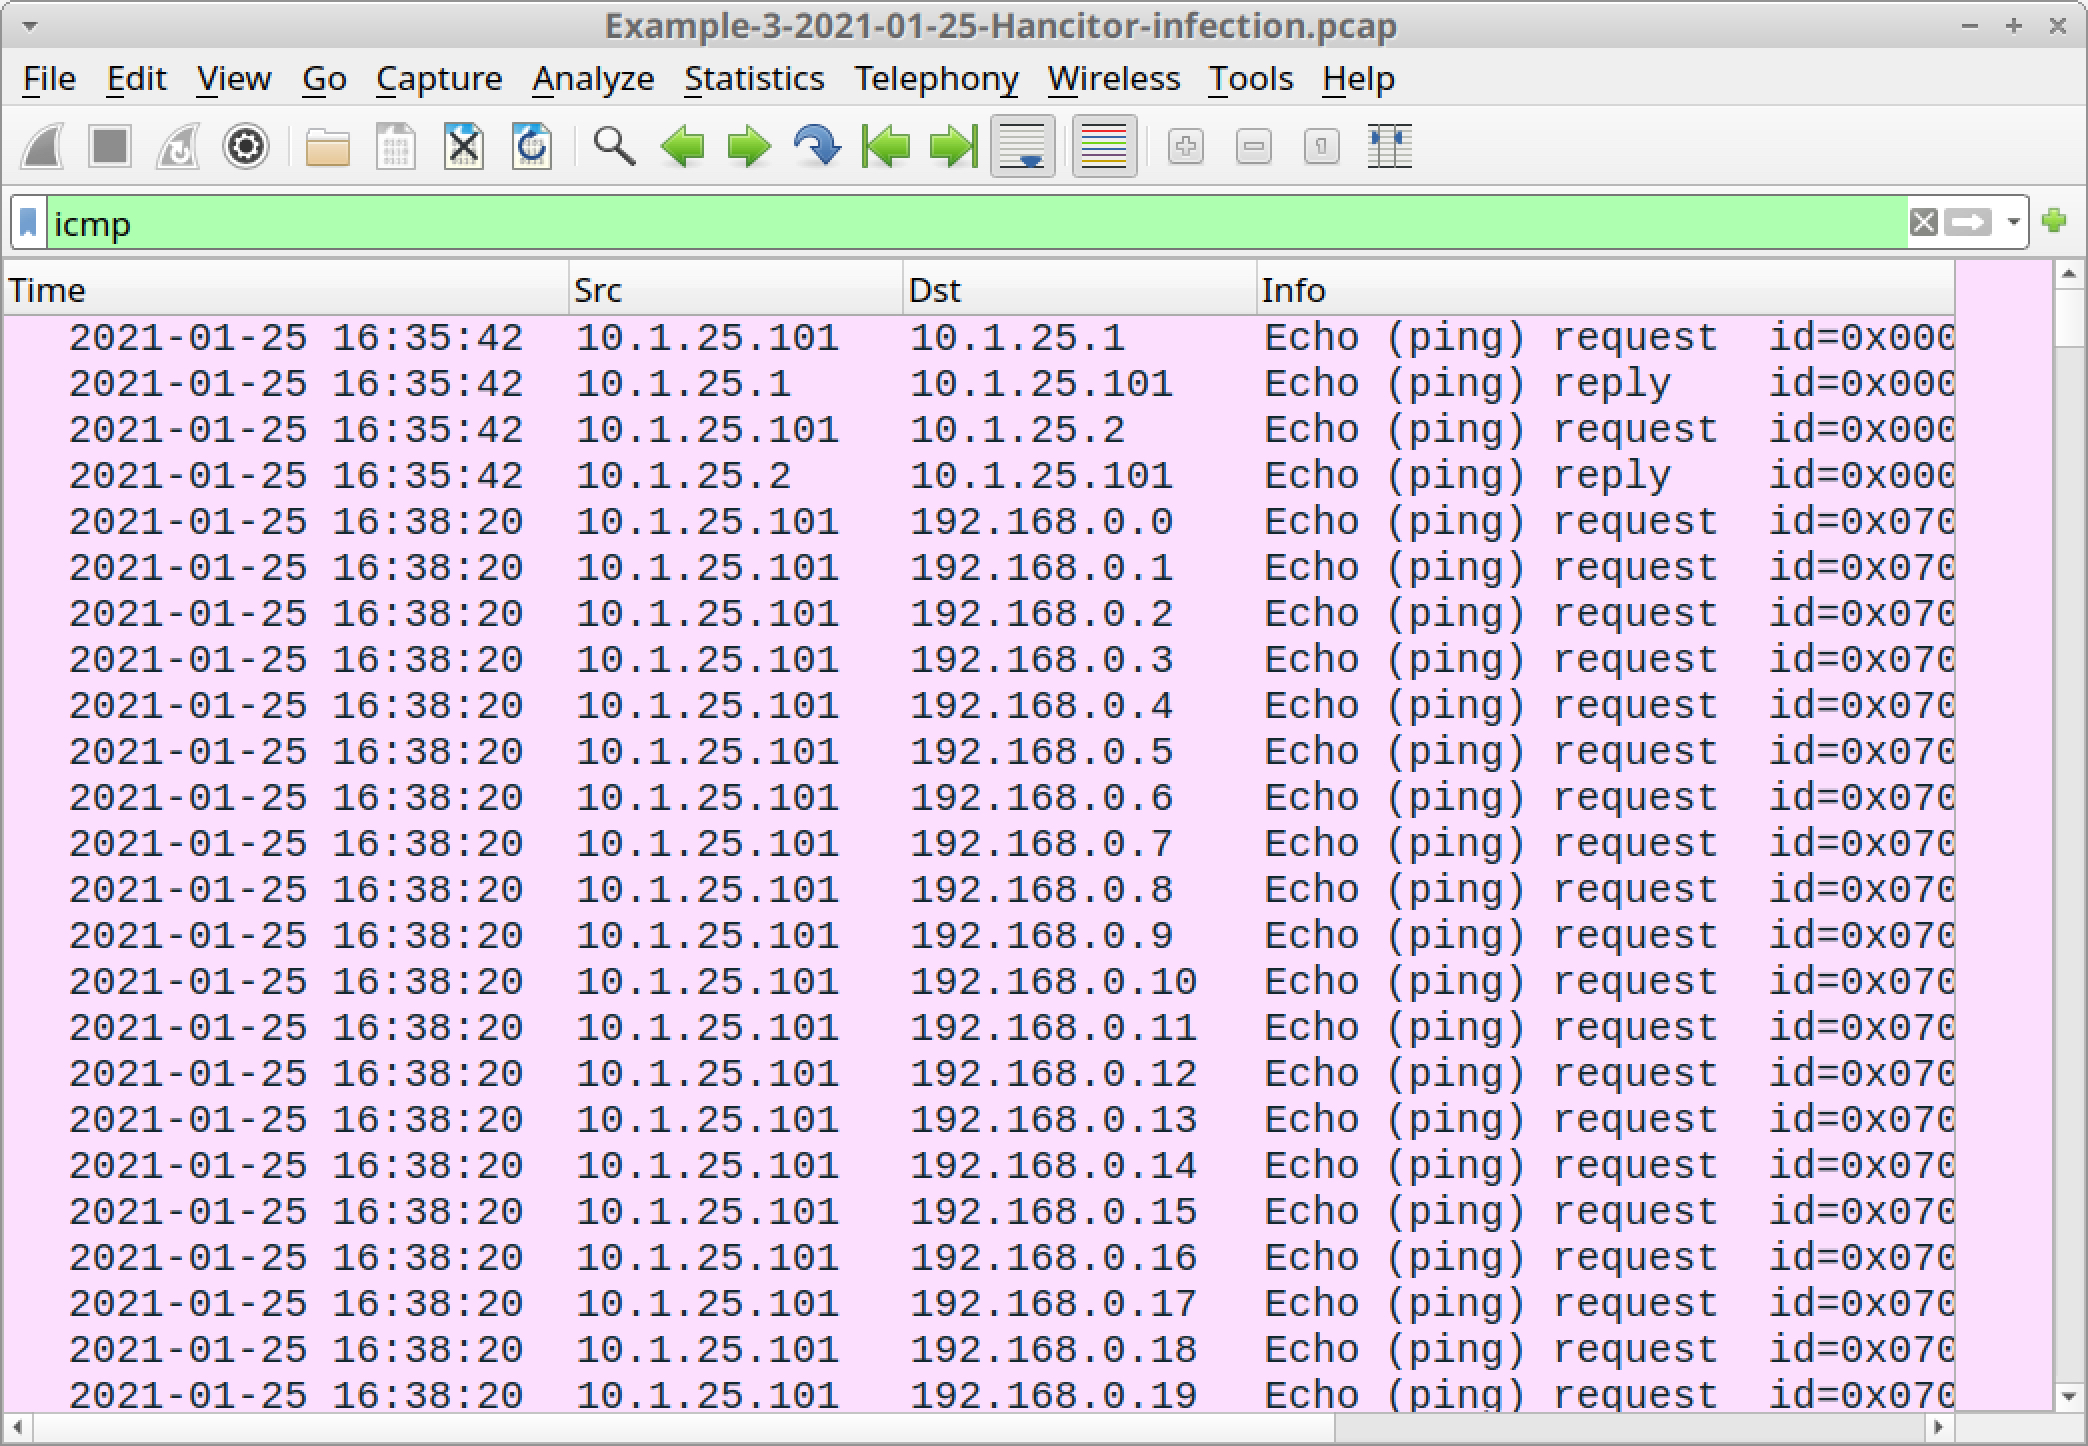 The screenshot displays an example of how ICMP traffic from a network ping tool sent through Cobalt Strike should look after you apply the Wireshark filter icmp to the example pcap. 